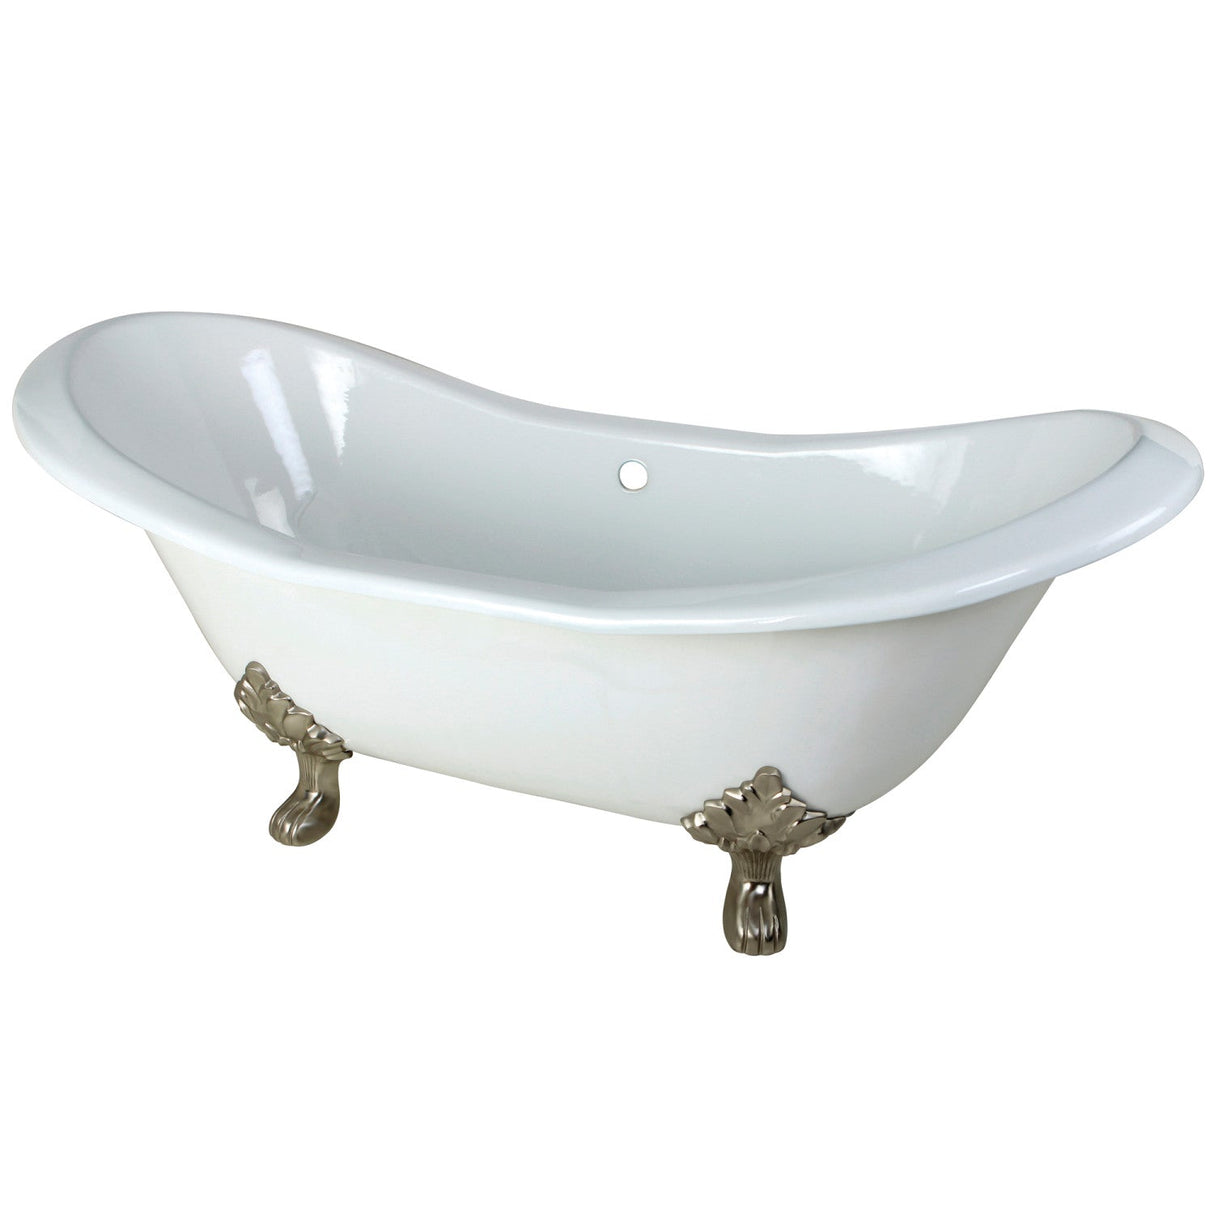 Aqua Eden VCTND7231NC8 72-Inch Cast Iron Double Slipper Clawfoot Tub (No Faucet Drillings), White/Brushed Nickel